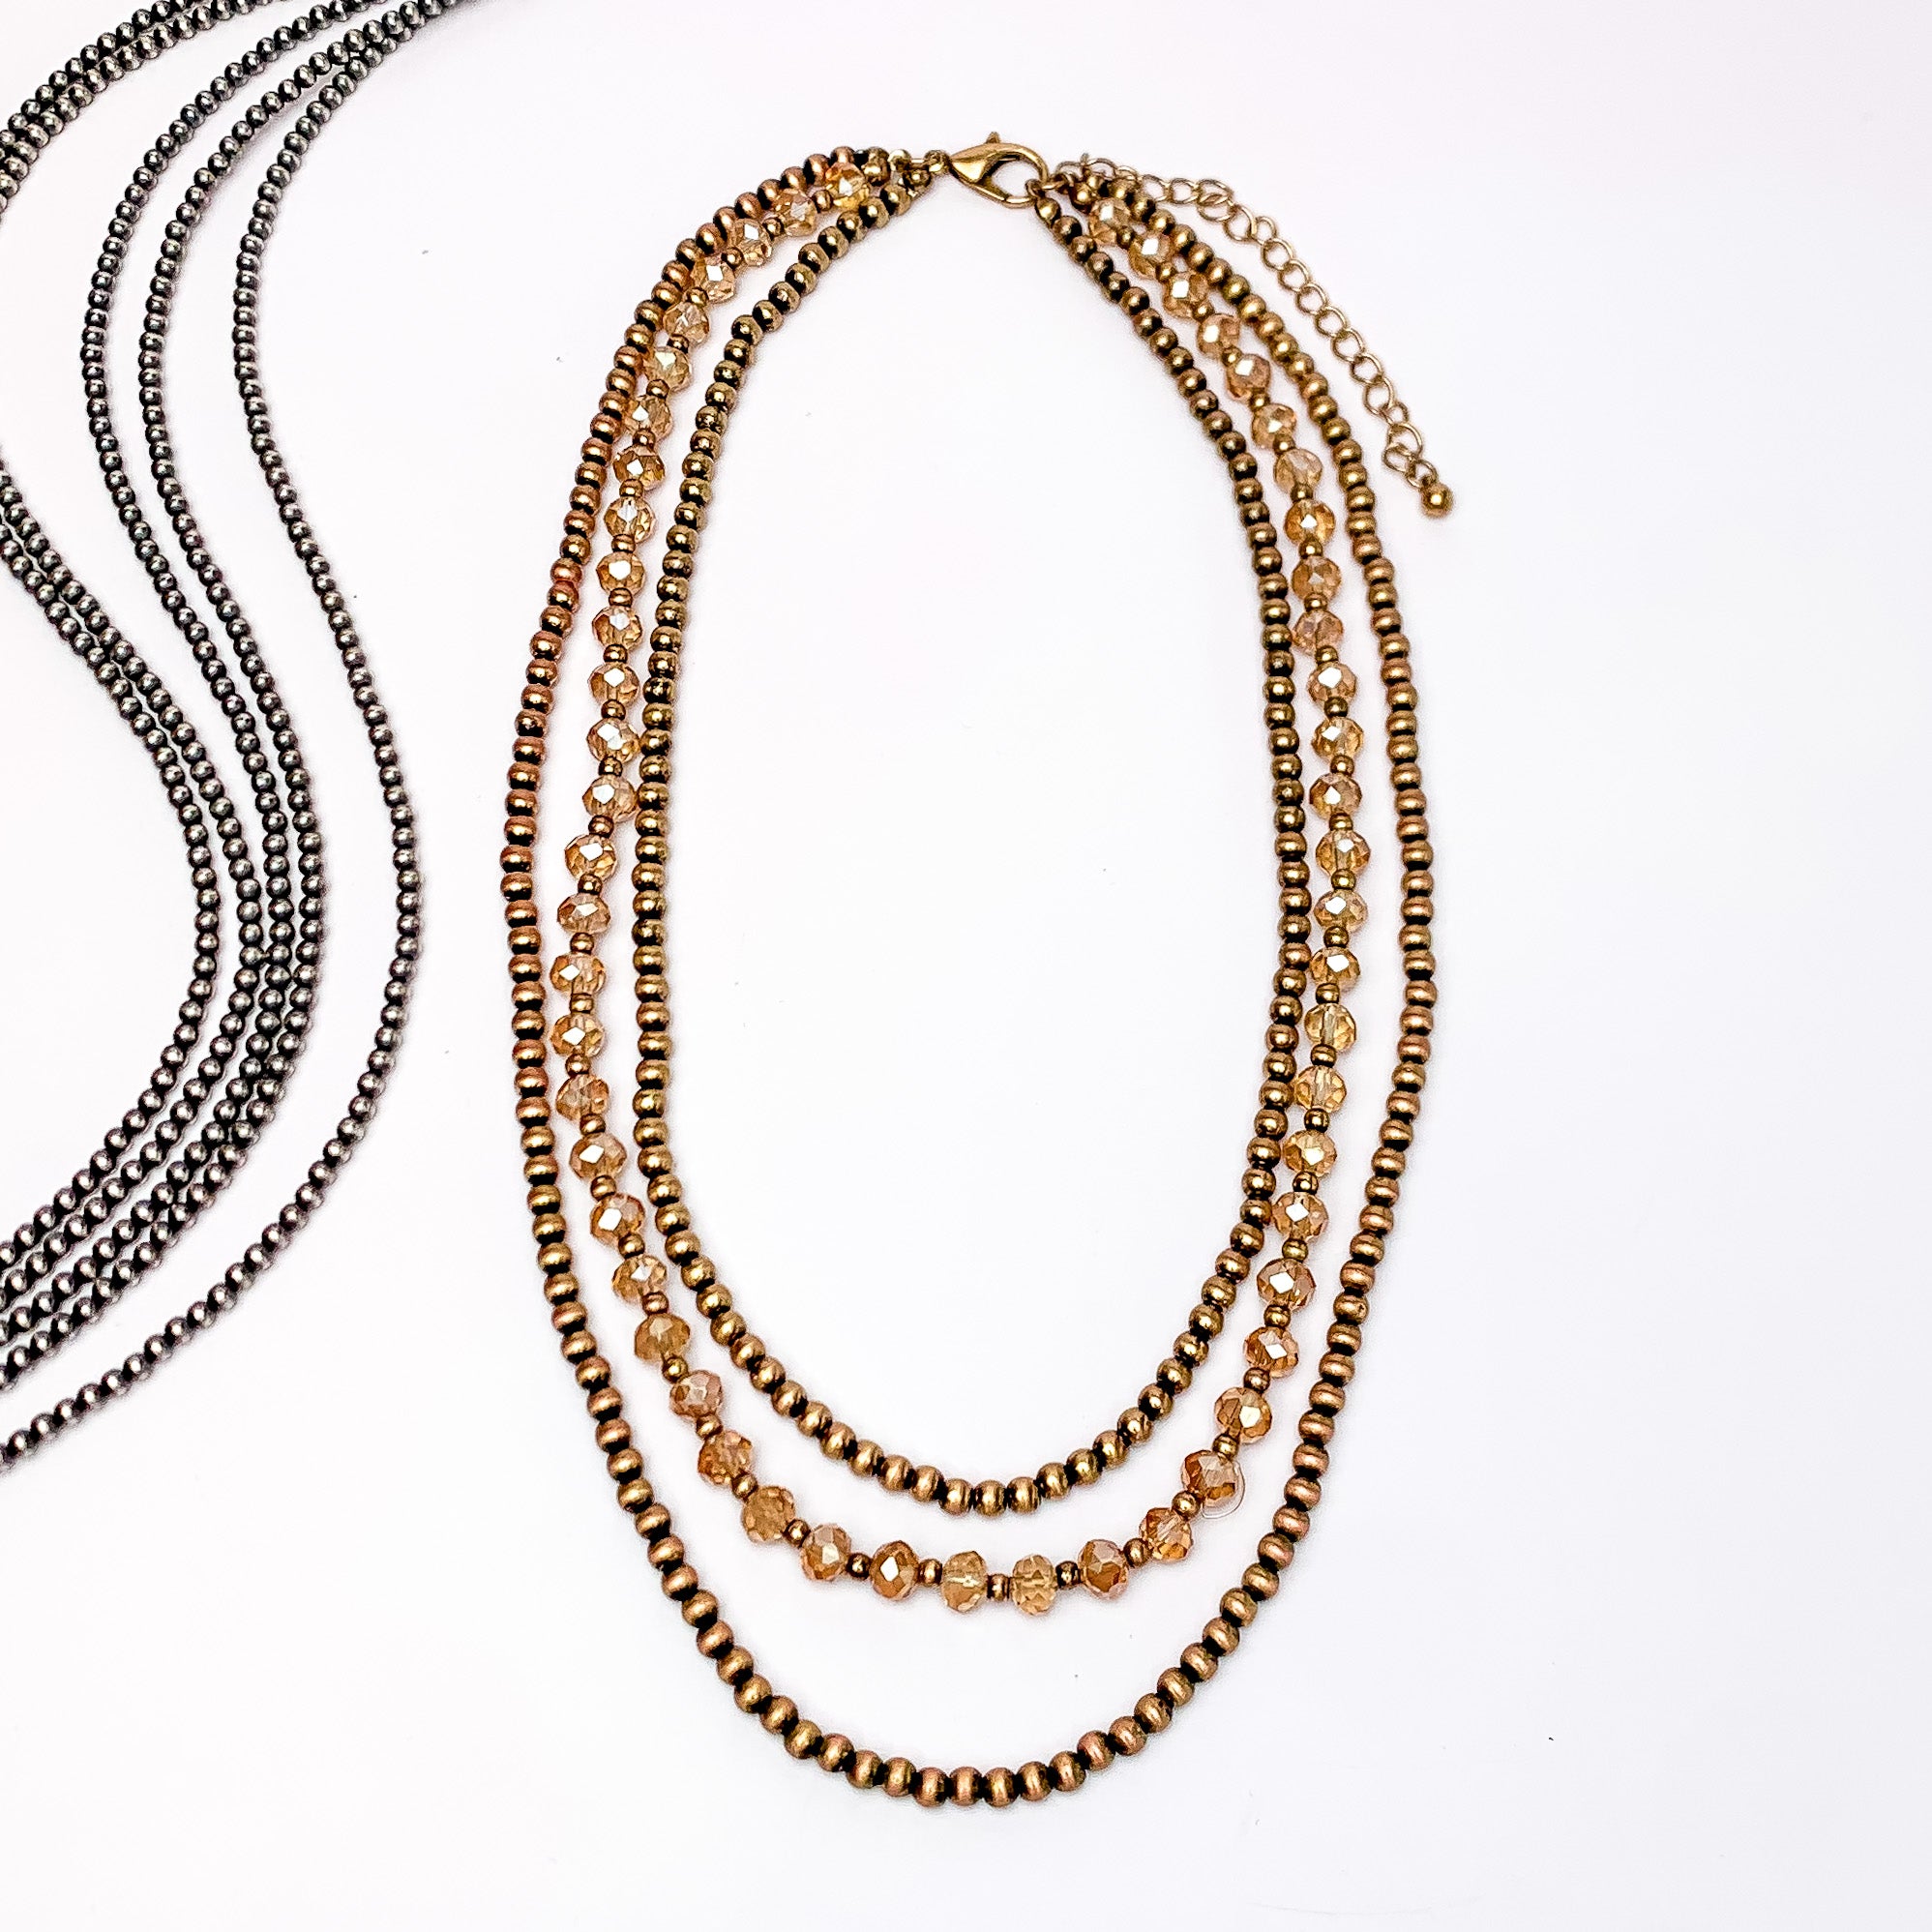 Wild Western Faux Navajo Three Strand Pearl Necklace in Copper Tone. Pictured on a white background with long beads on the left side of the picture.